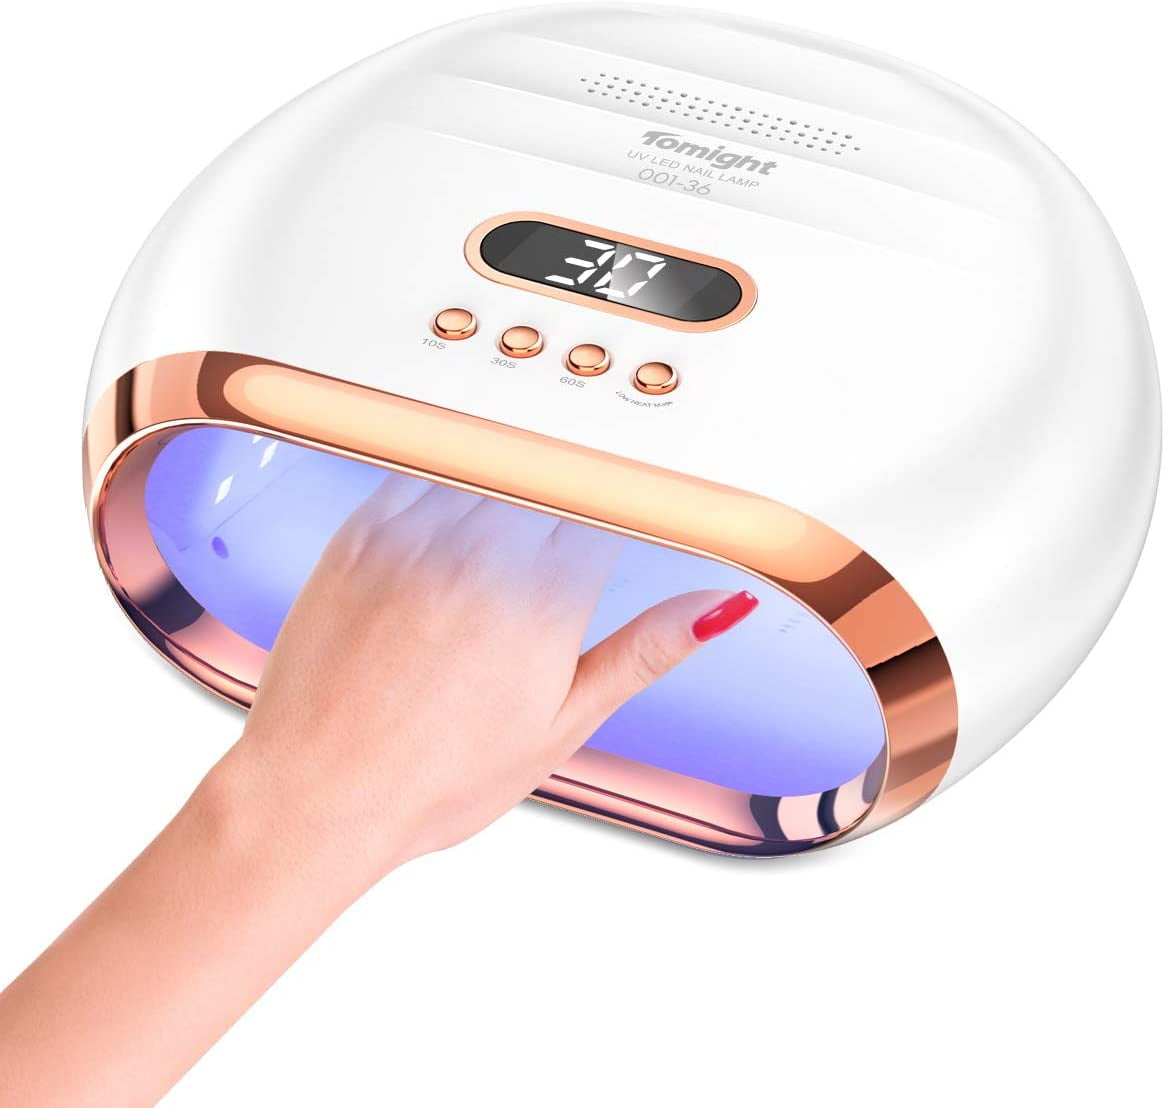 Tomight 72W UV Nail Lamp, 36 LEDs Professional Nail Dryer with 4 Timer Setting and Smart Motion Sensor for Nail Art, Gift for Women for Fingernail & Toenail Polish at Home